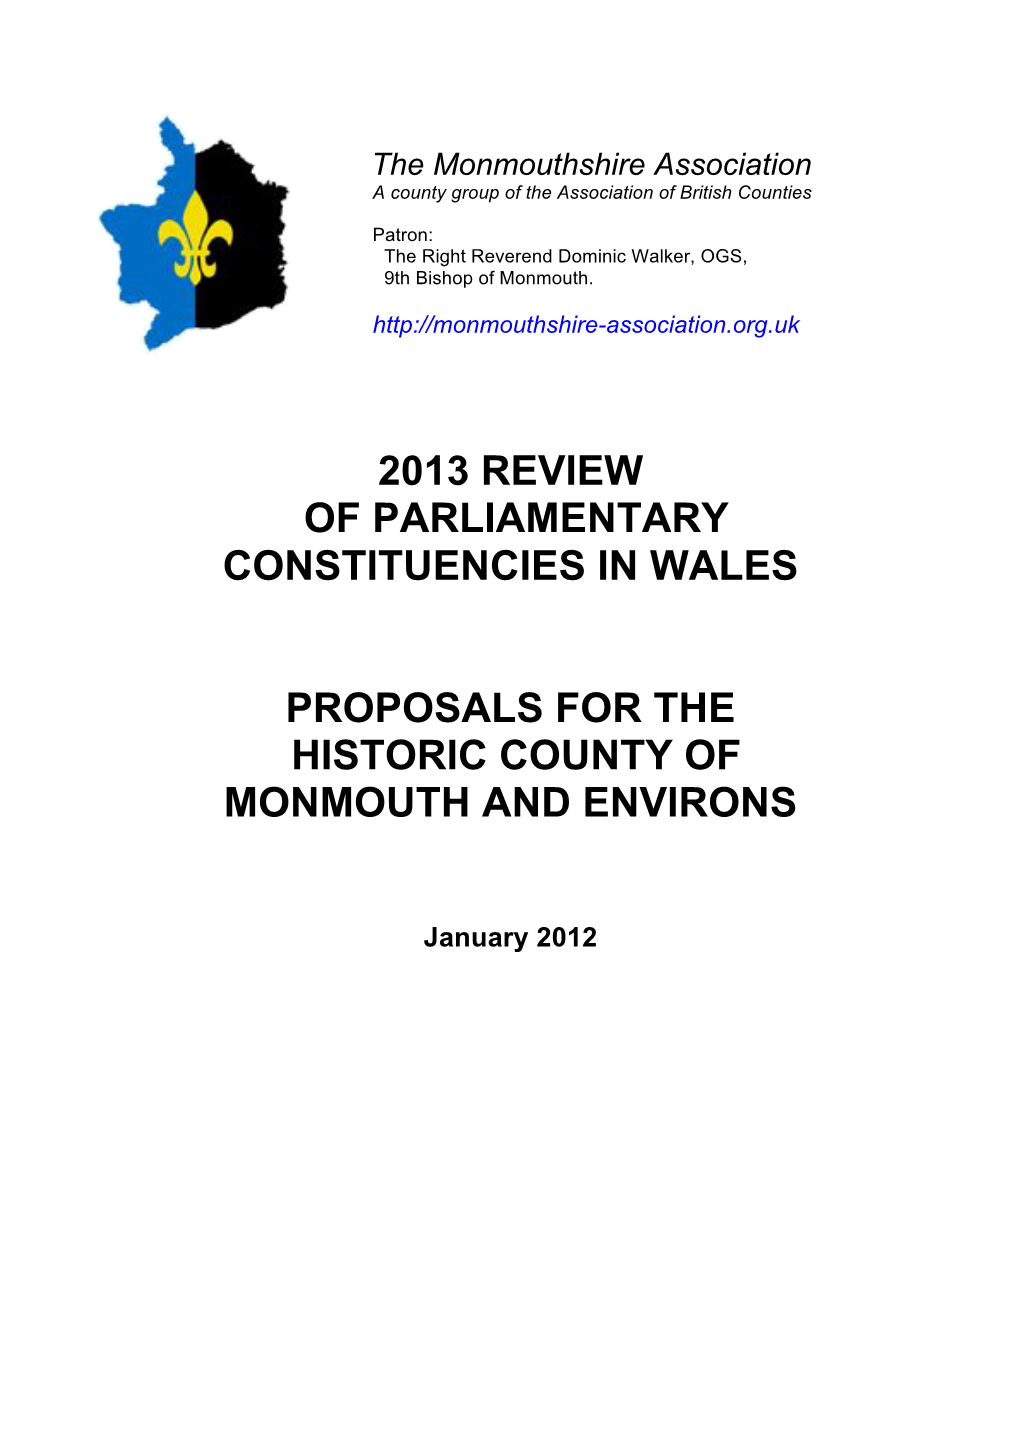 Our Proposals for Constituencies in the 2013 Review